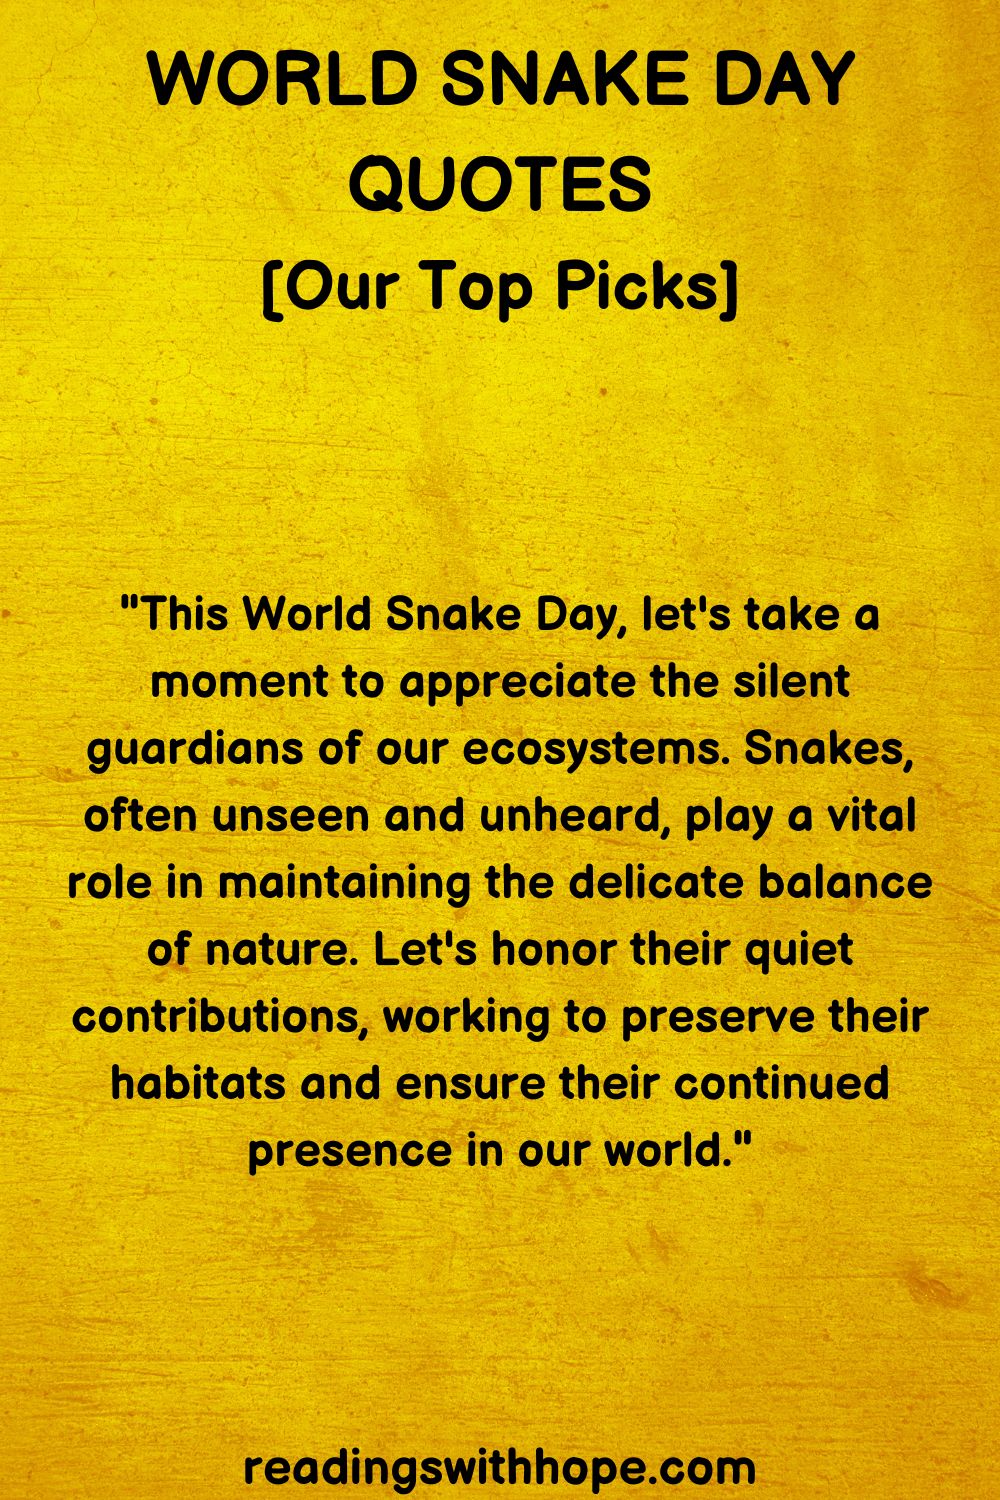 30 World Snake Day Quotes and Messages